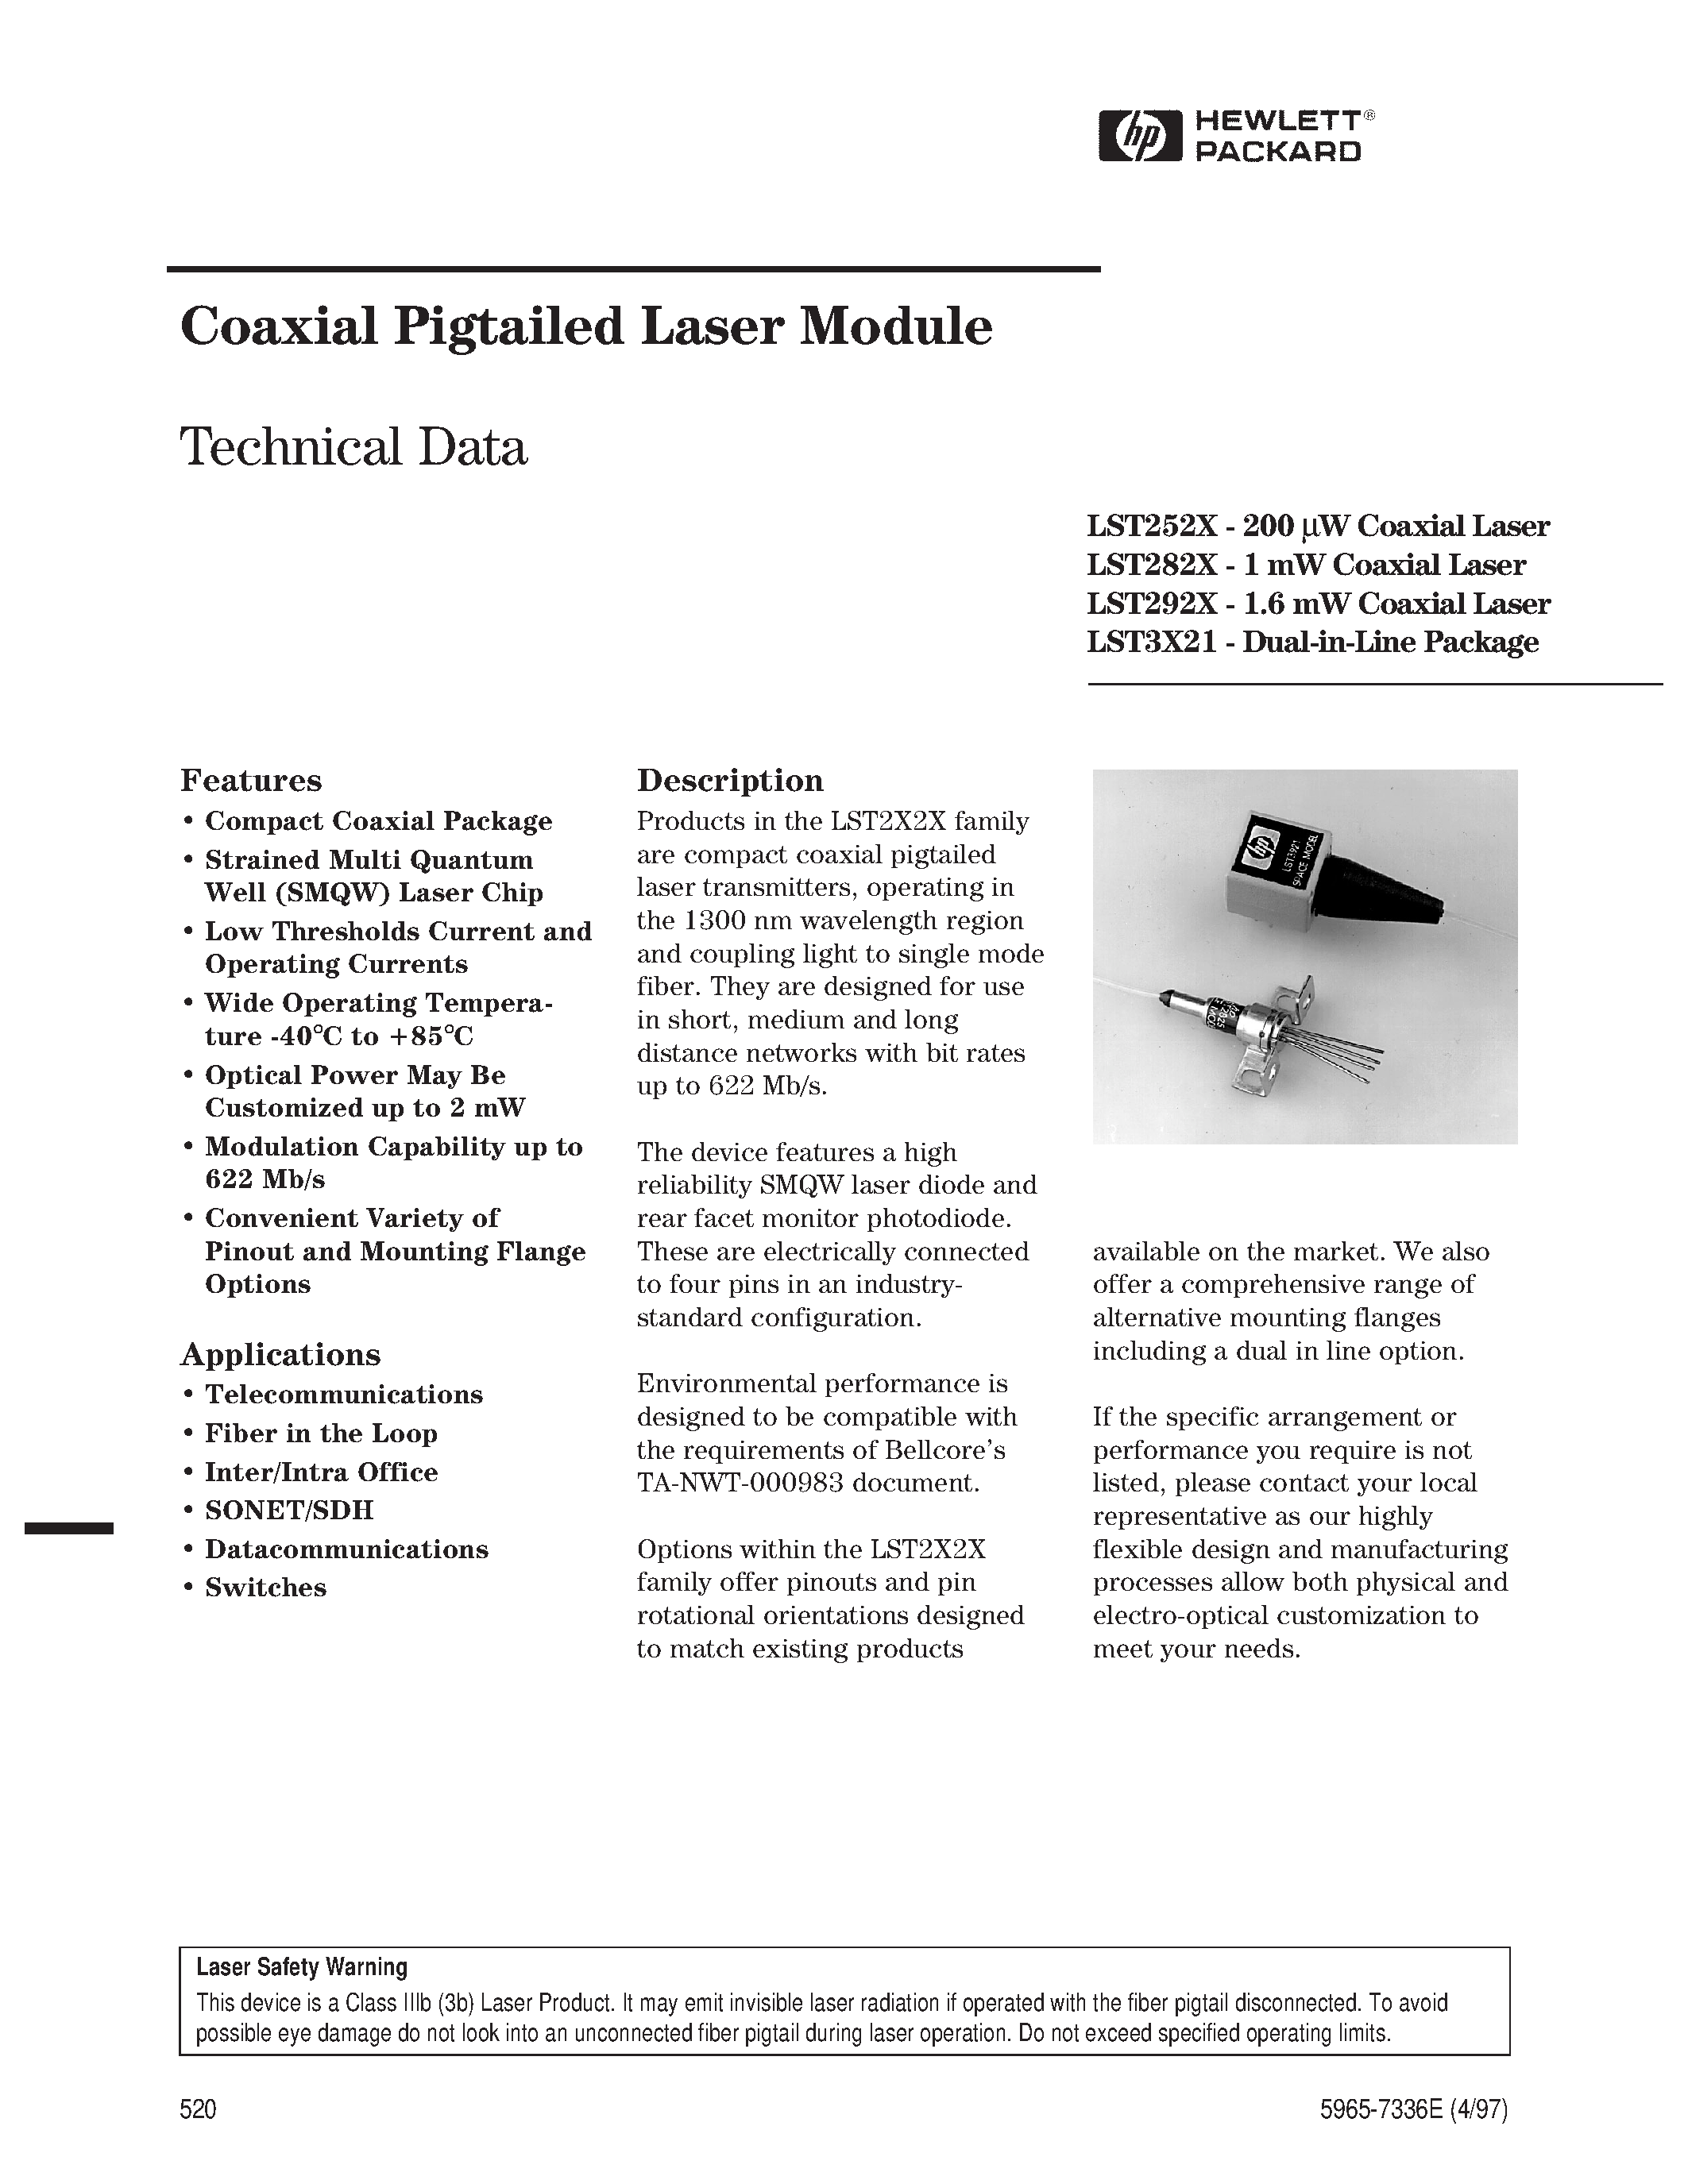 Даташит LST2425A-B-AP - Coaxial Pigtailed Laser Module страница 1